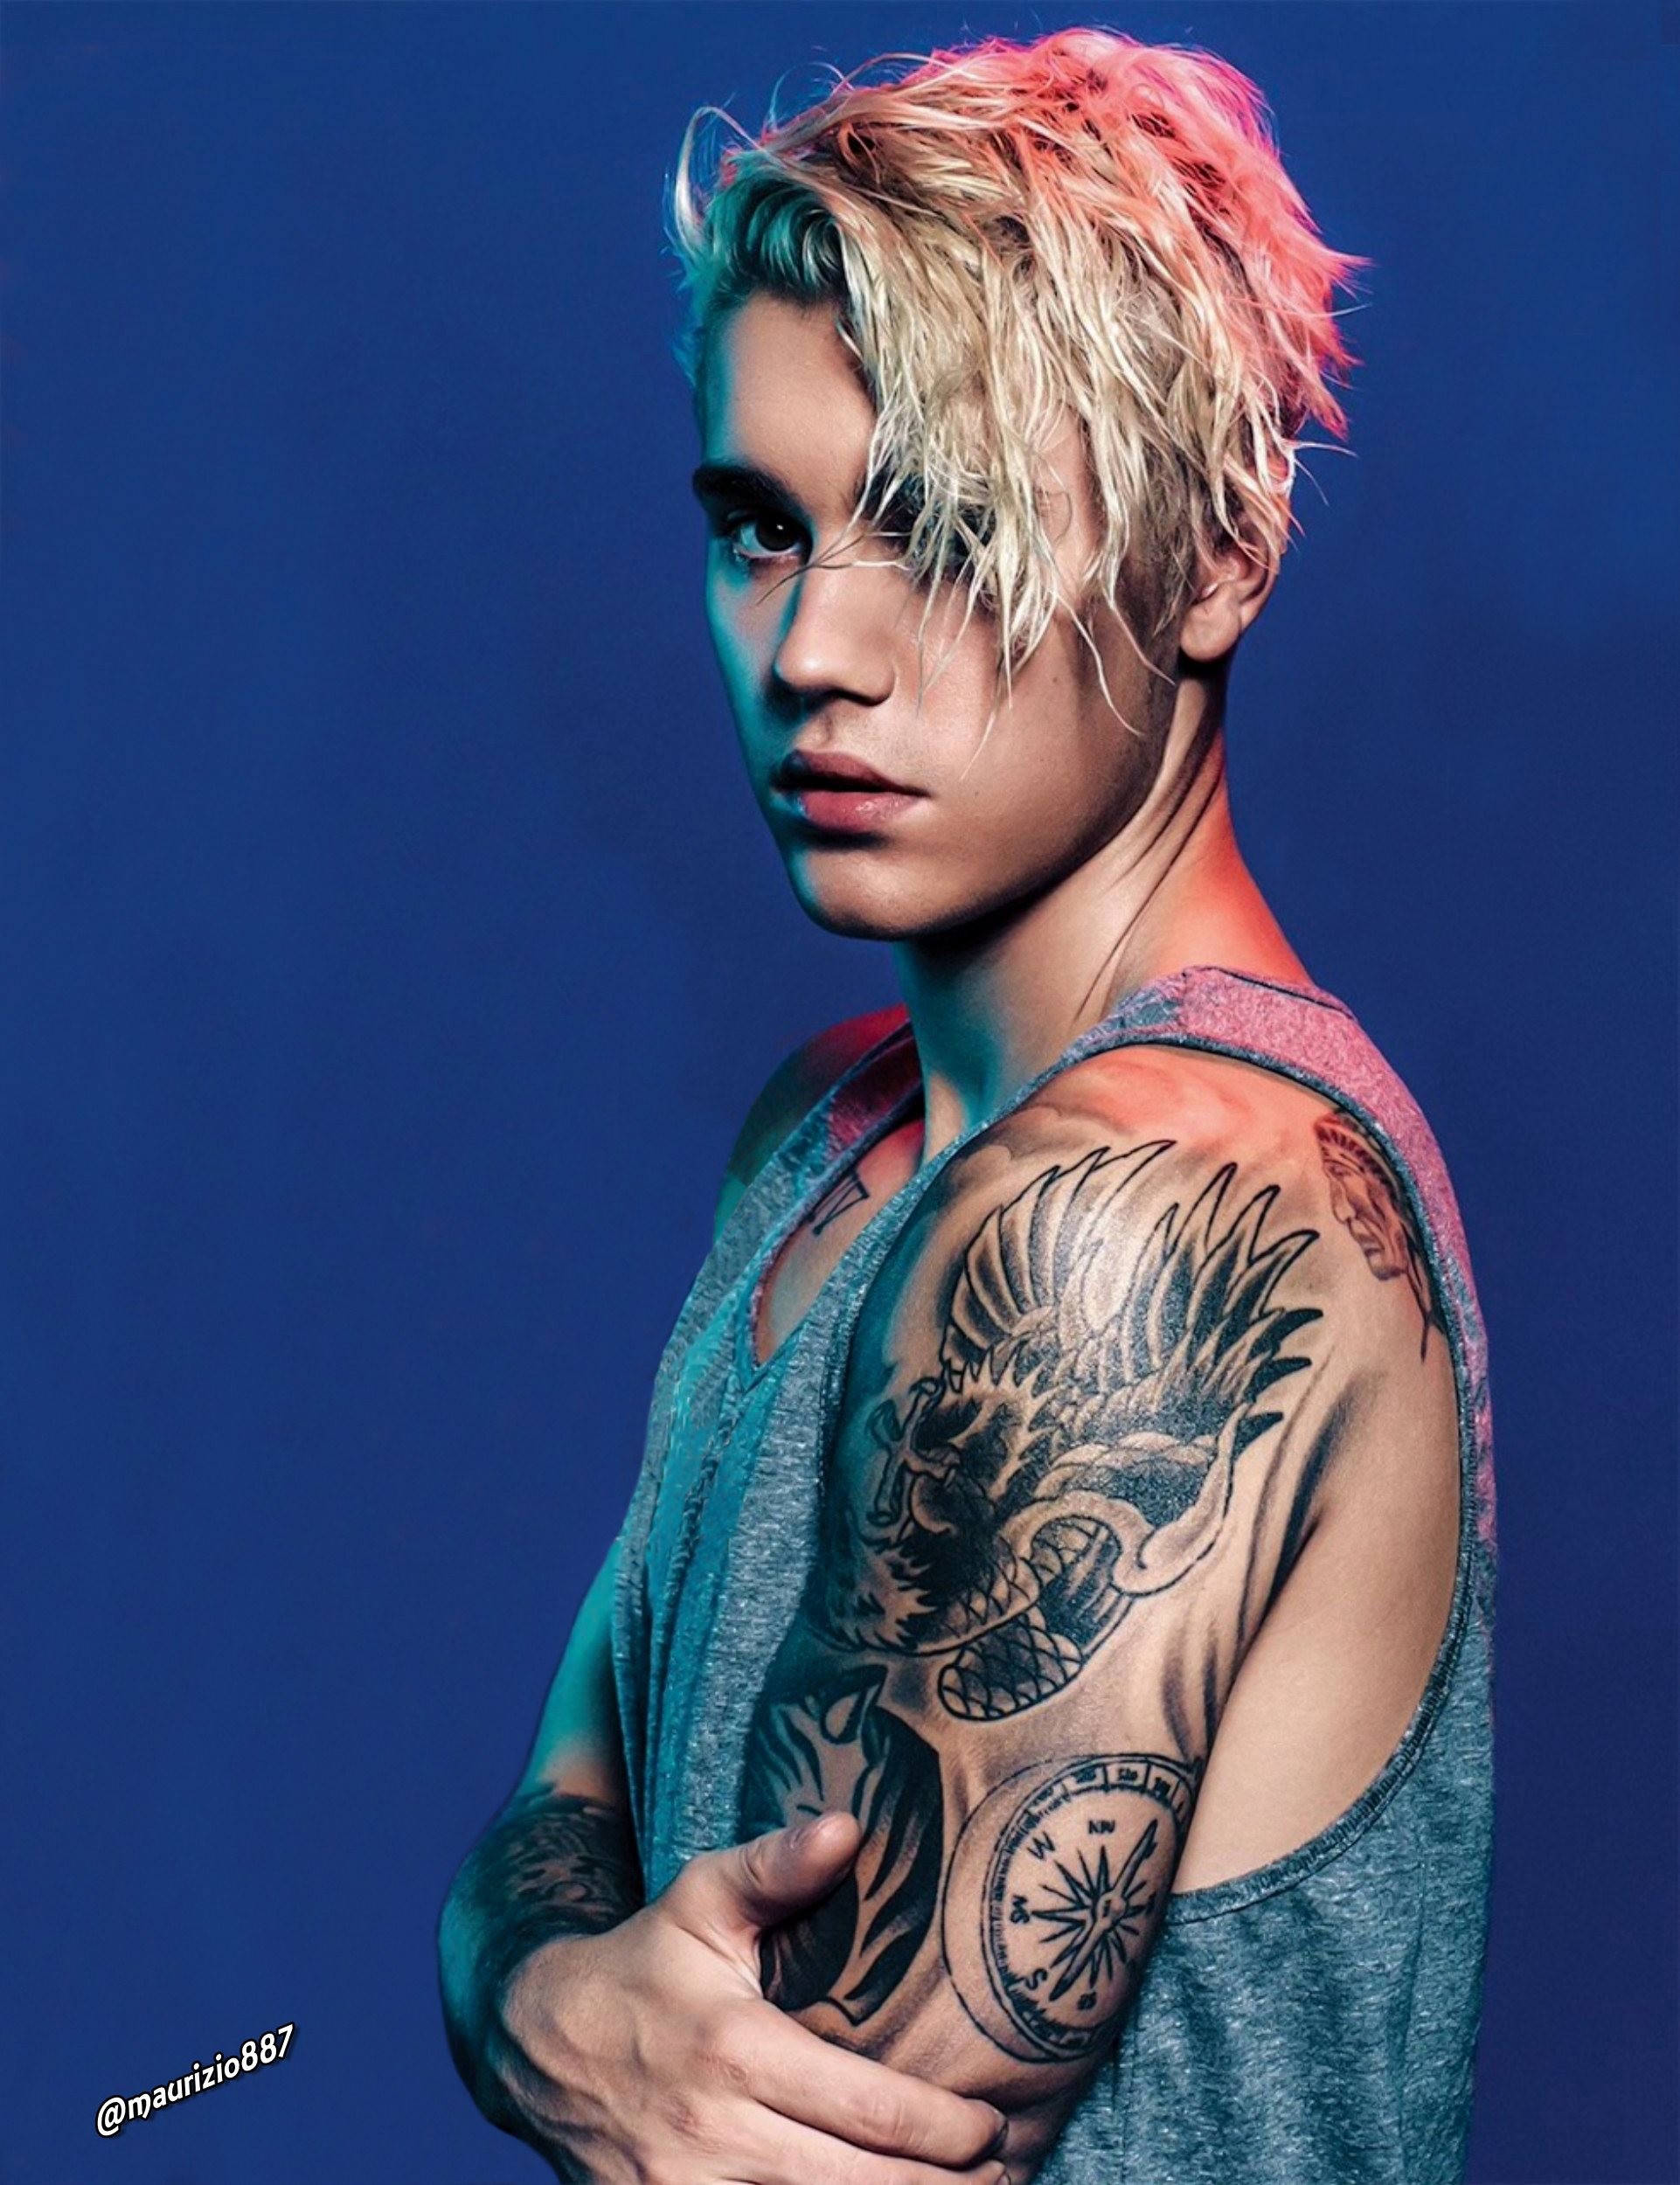 Justin Bieber New Wallpapers 2018 (67+ images)